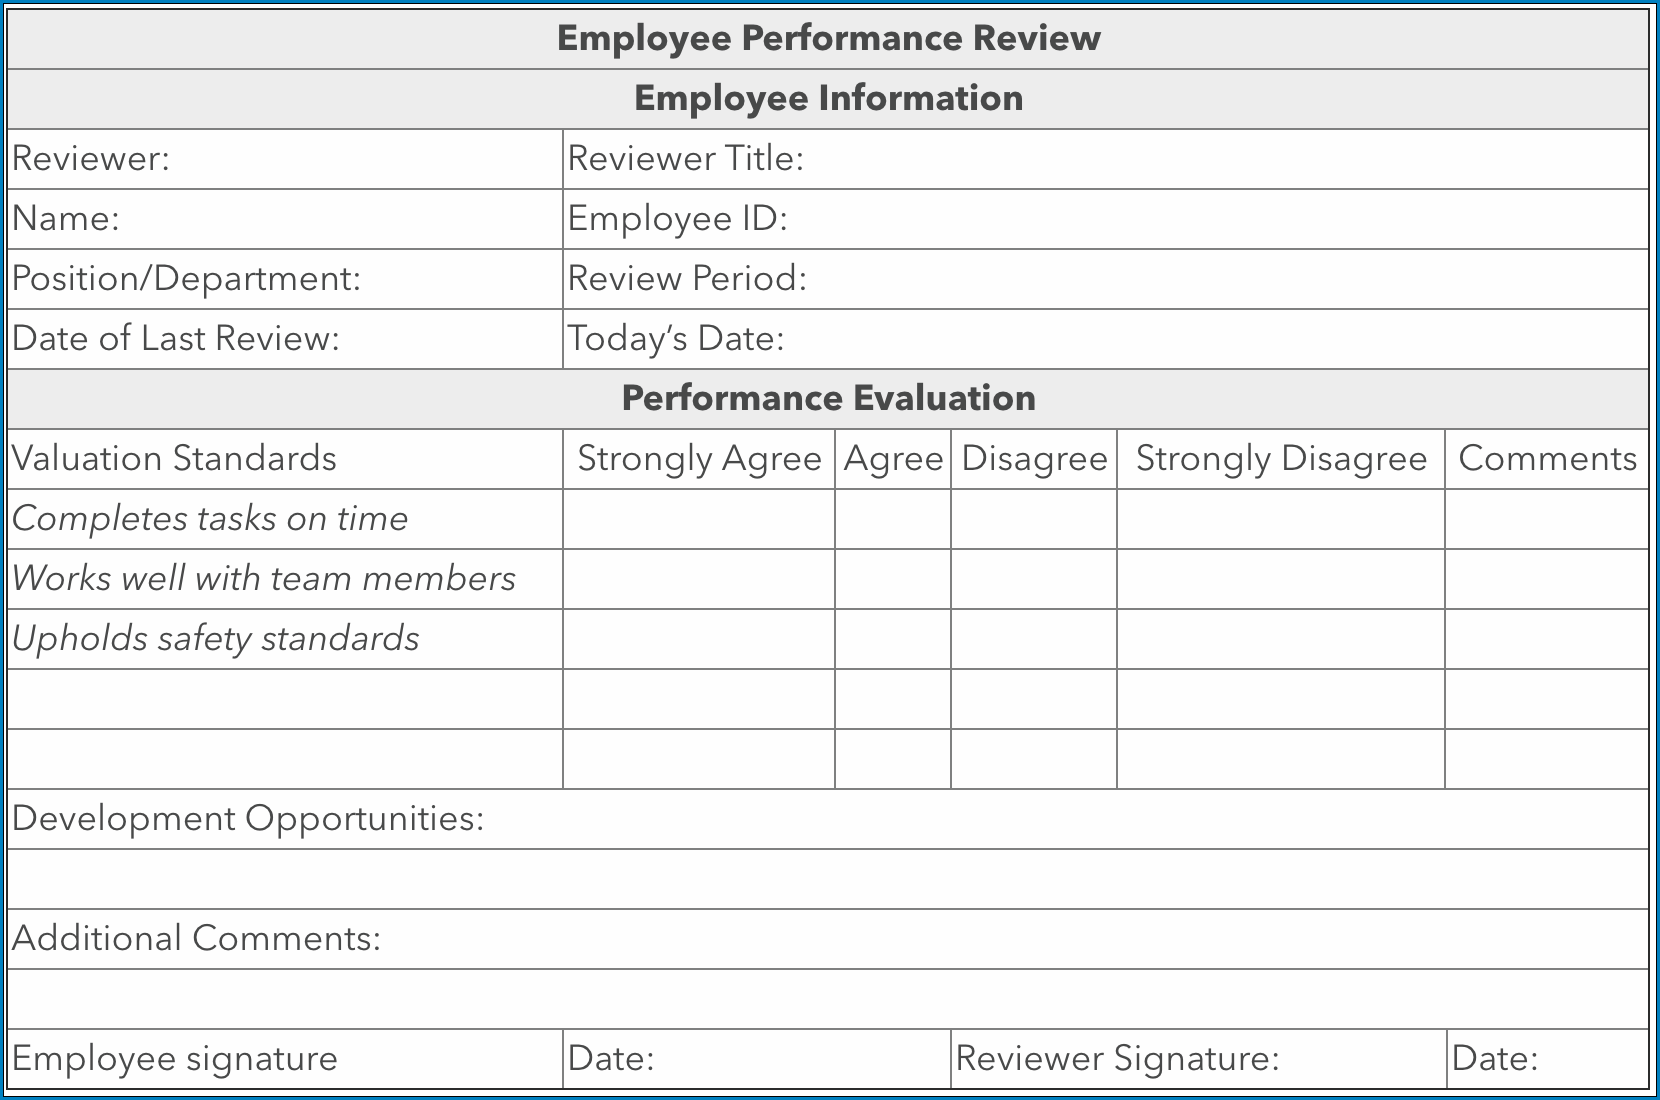 Employee Review Form Example